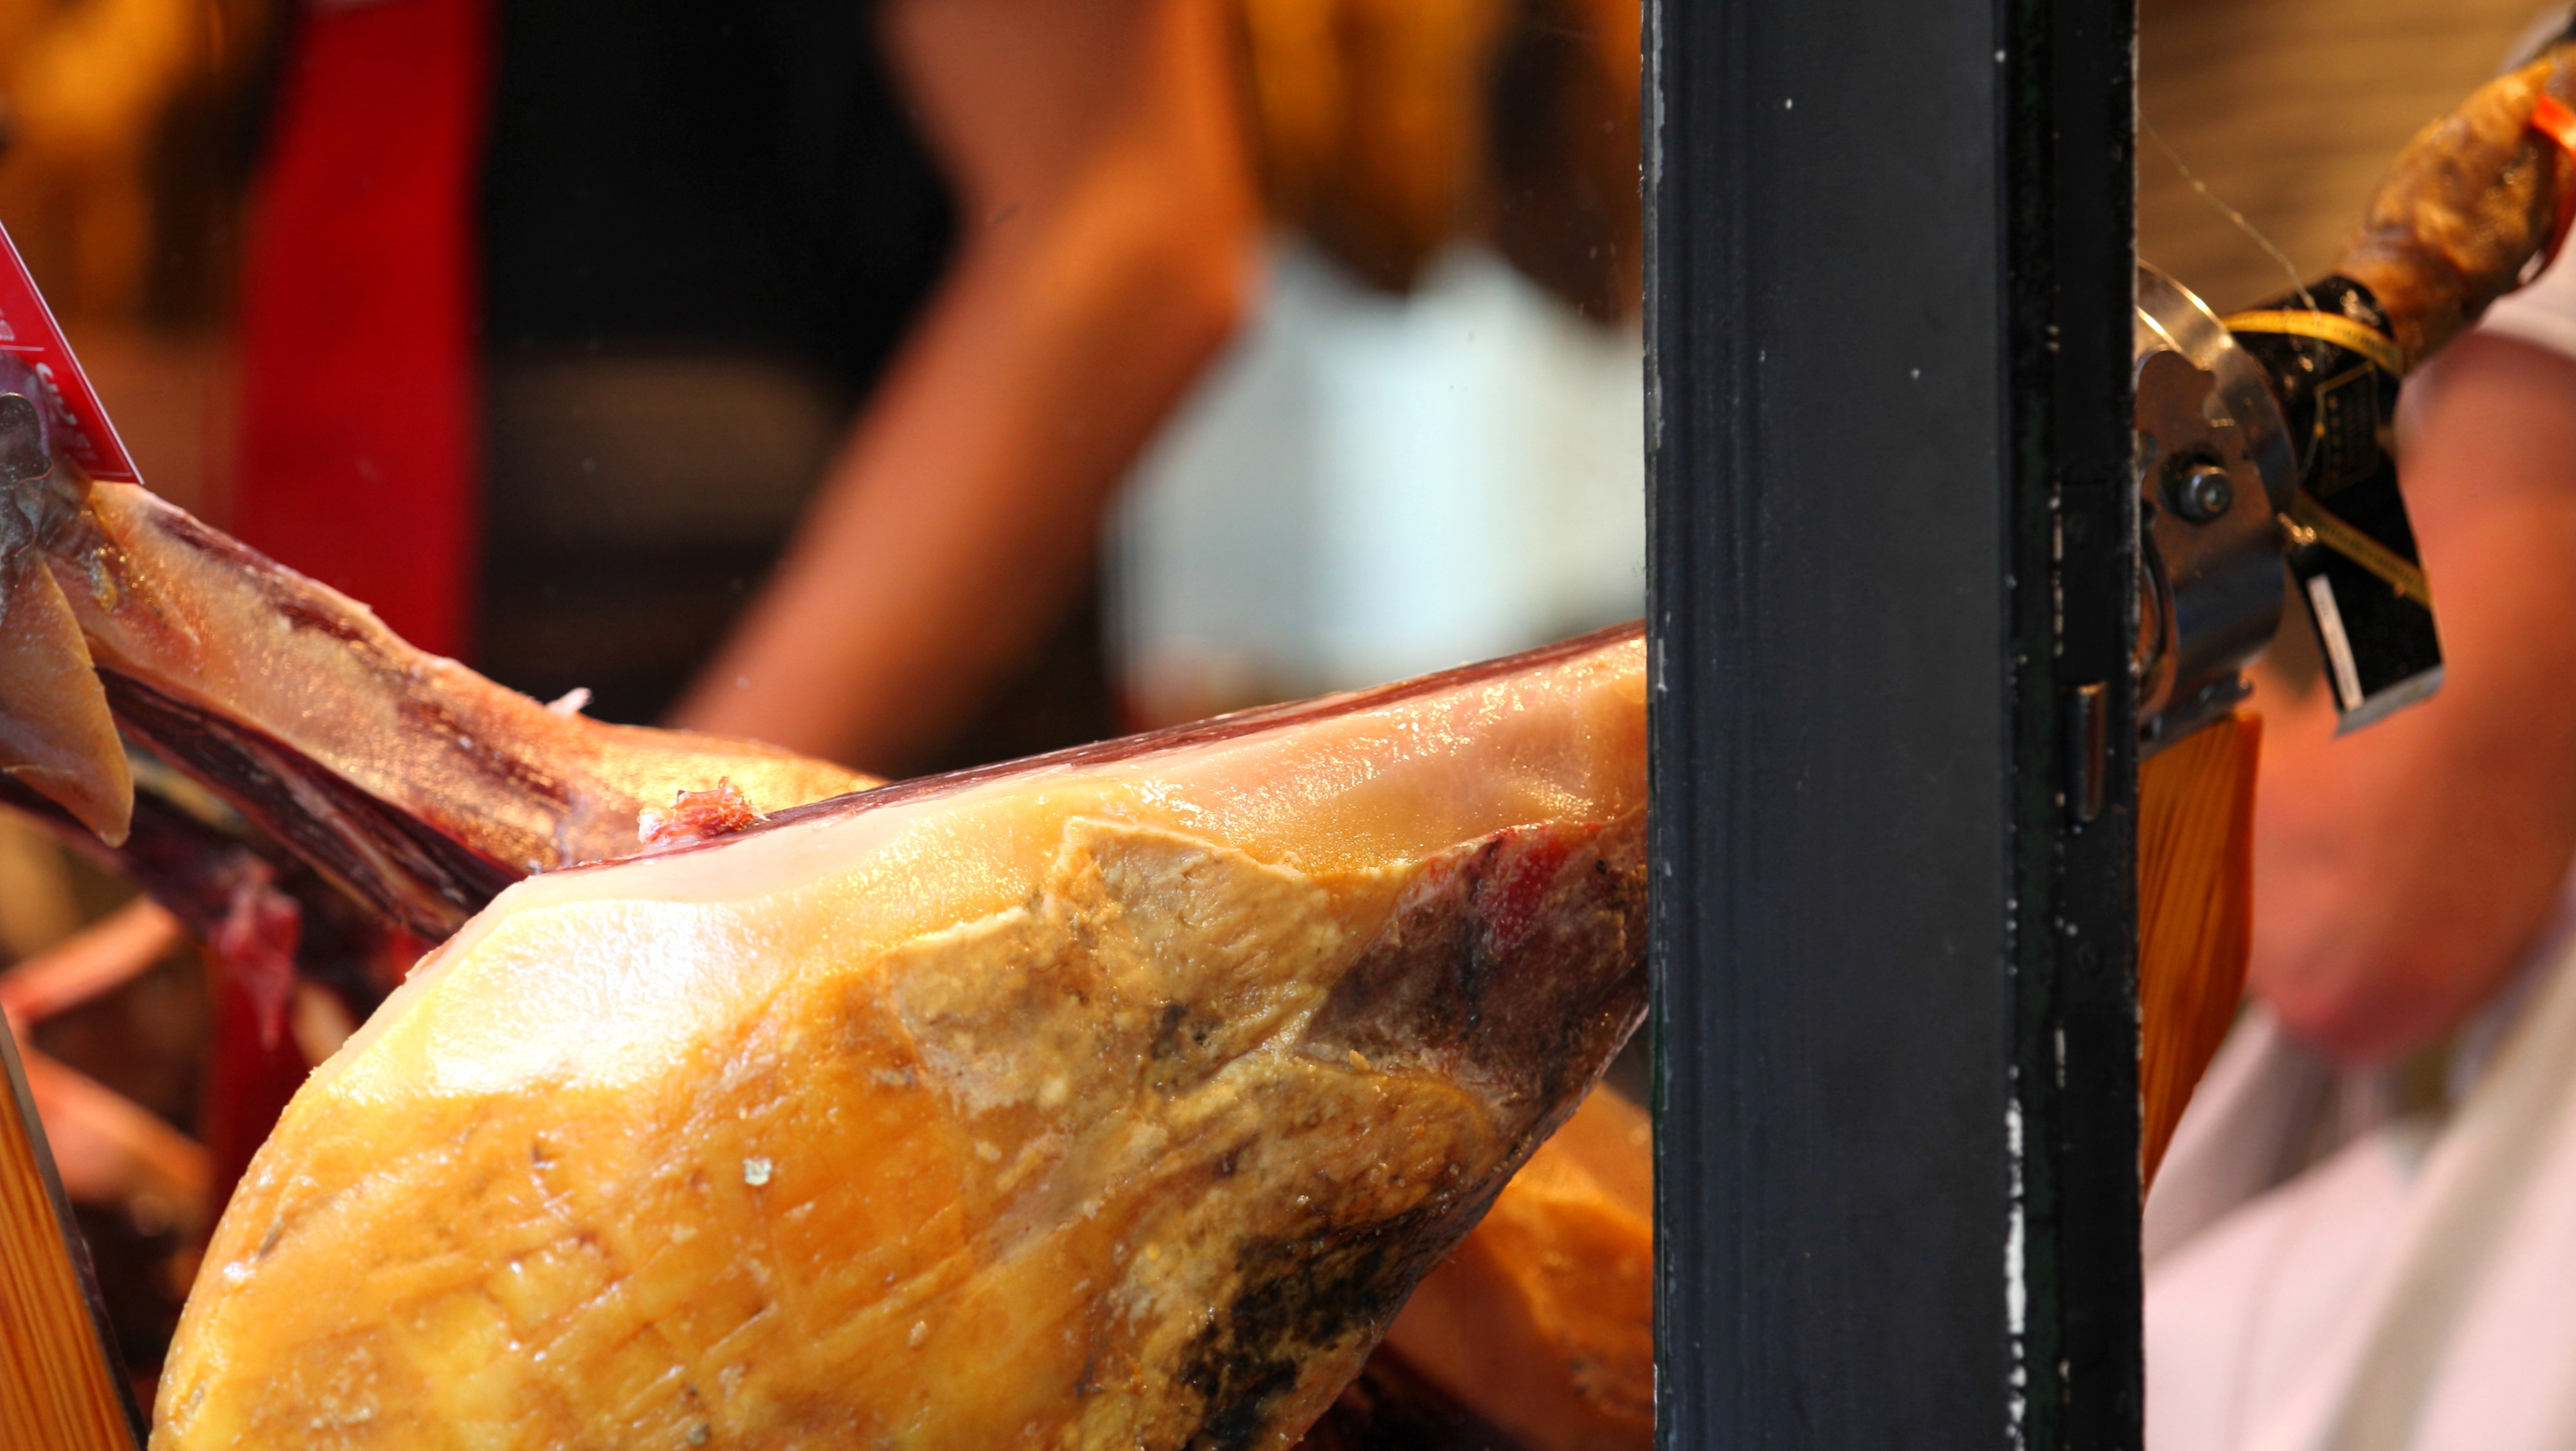 jamon (ham) in Barcelona, Spain, Europe, August 2013, picture 32